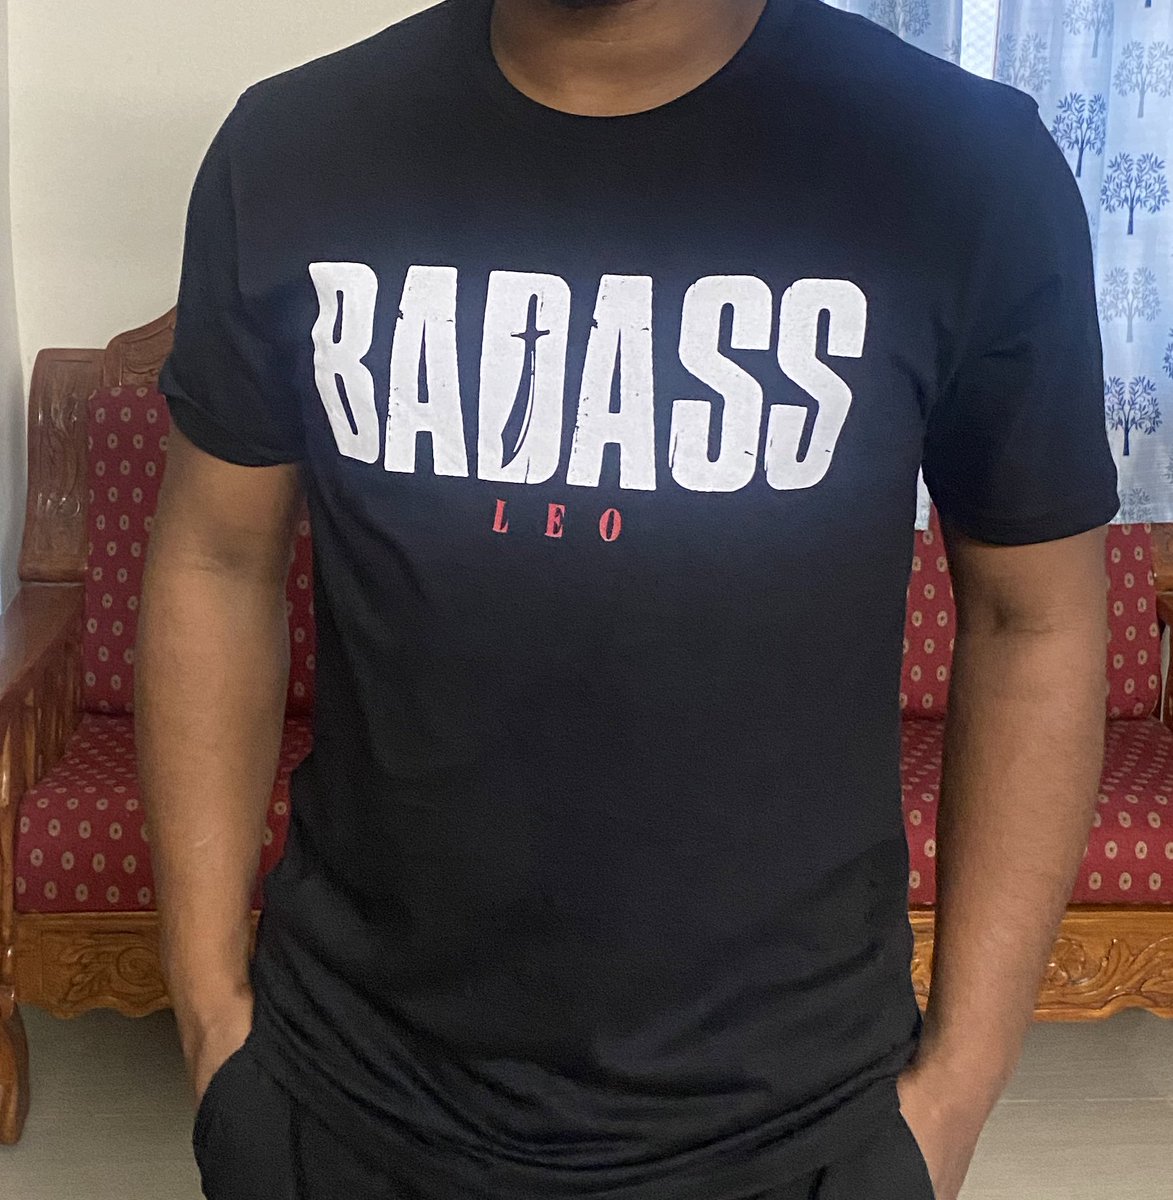 @itisprashanth Bro..Got it Finally. My first order from RoarSouth. The quality is too notch and just exceeded my expectations. Thanks to you and your team for this wonderful design. Keep Rocking 🔥🧊 More orders to go
#LeoFDFS #LeofromOct19 @actorvijay @Dir_Lokesh @7screenstudio